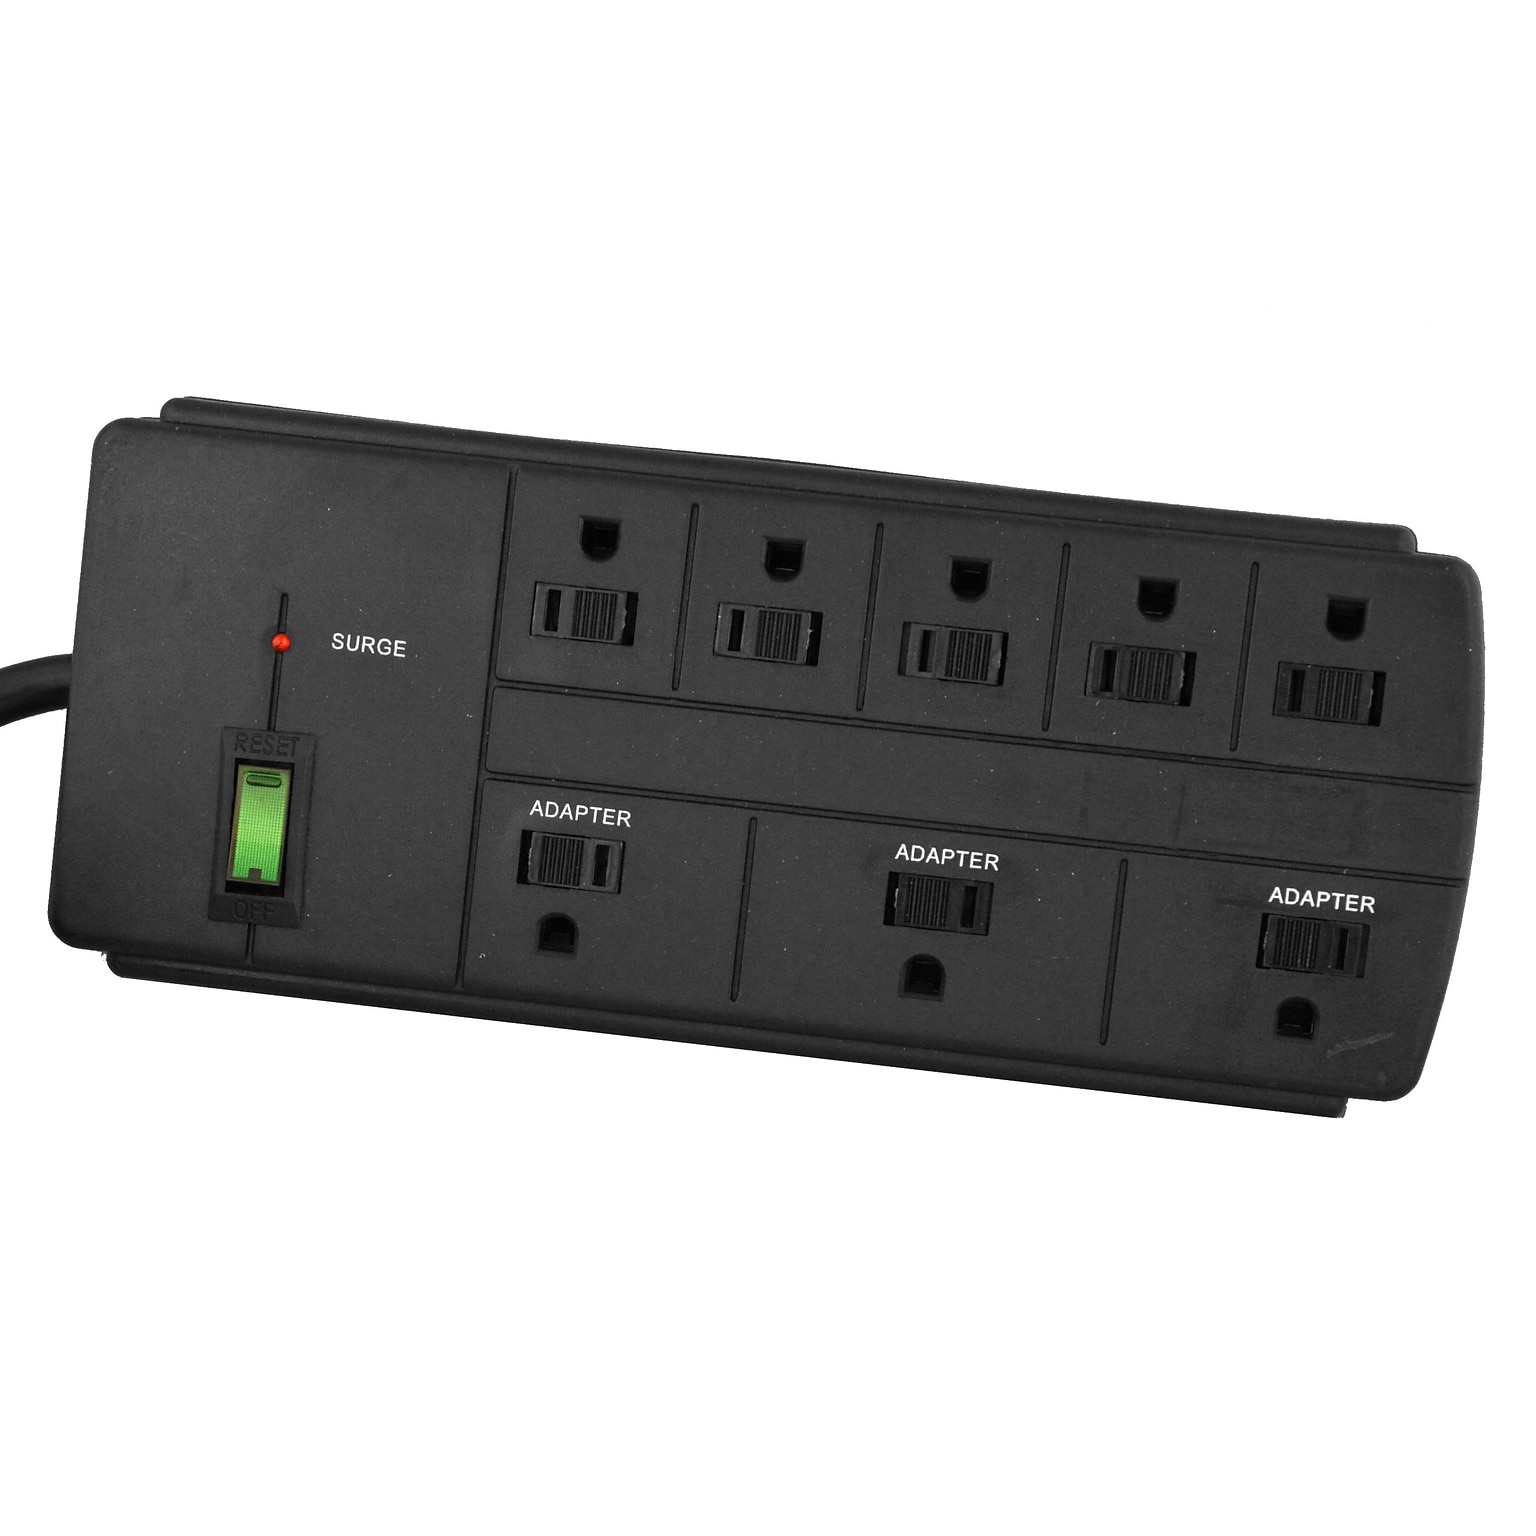 GoGreen Power 8 Outlet Surge Protector, 6 cord, Black (GG-18316BK)